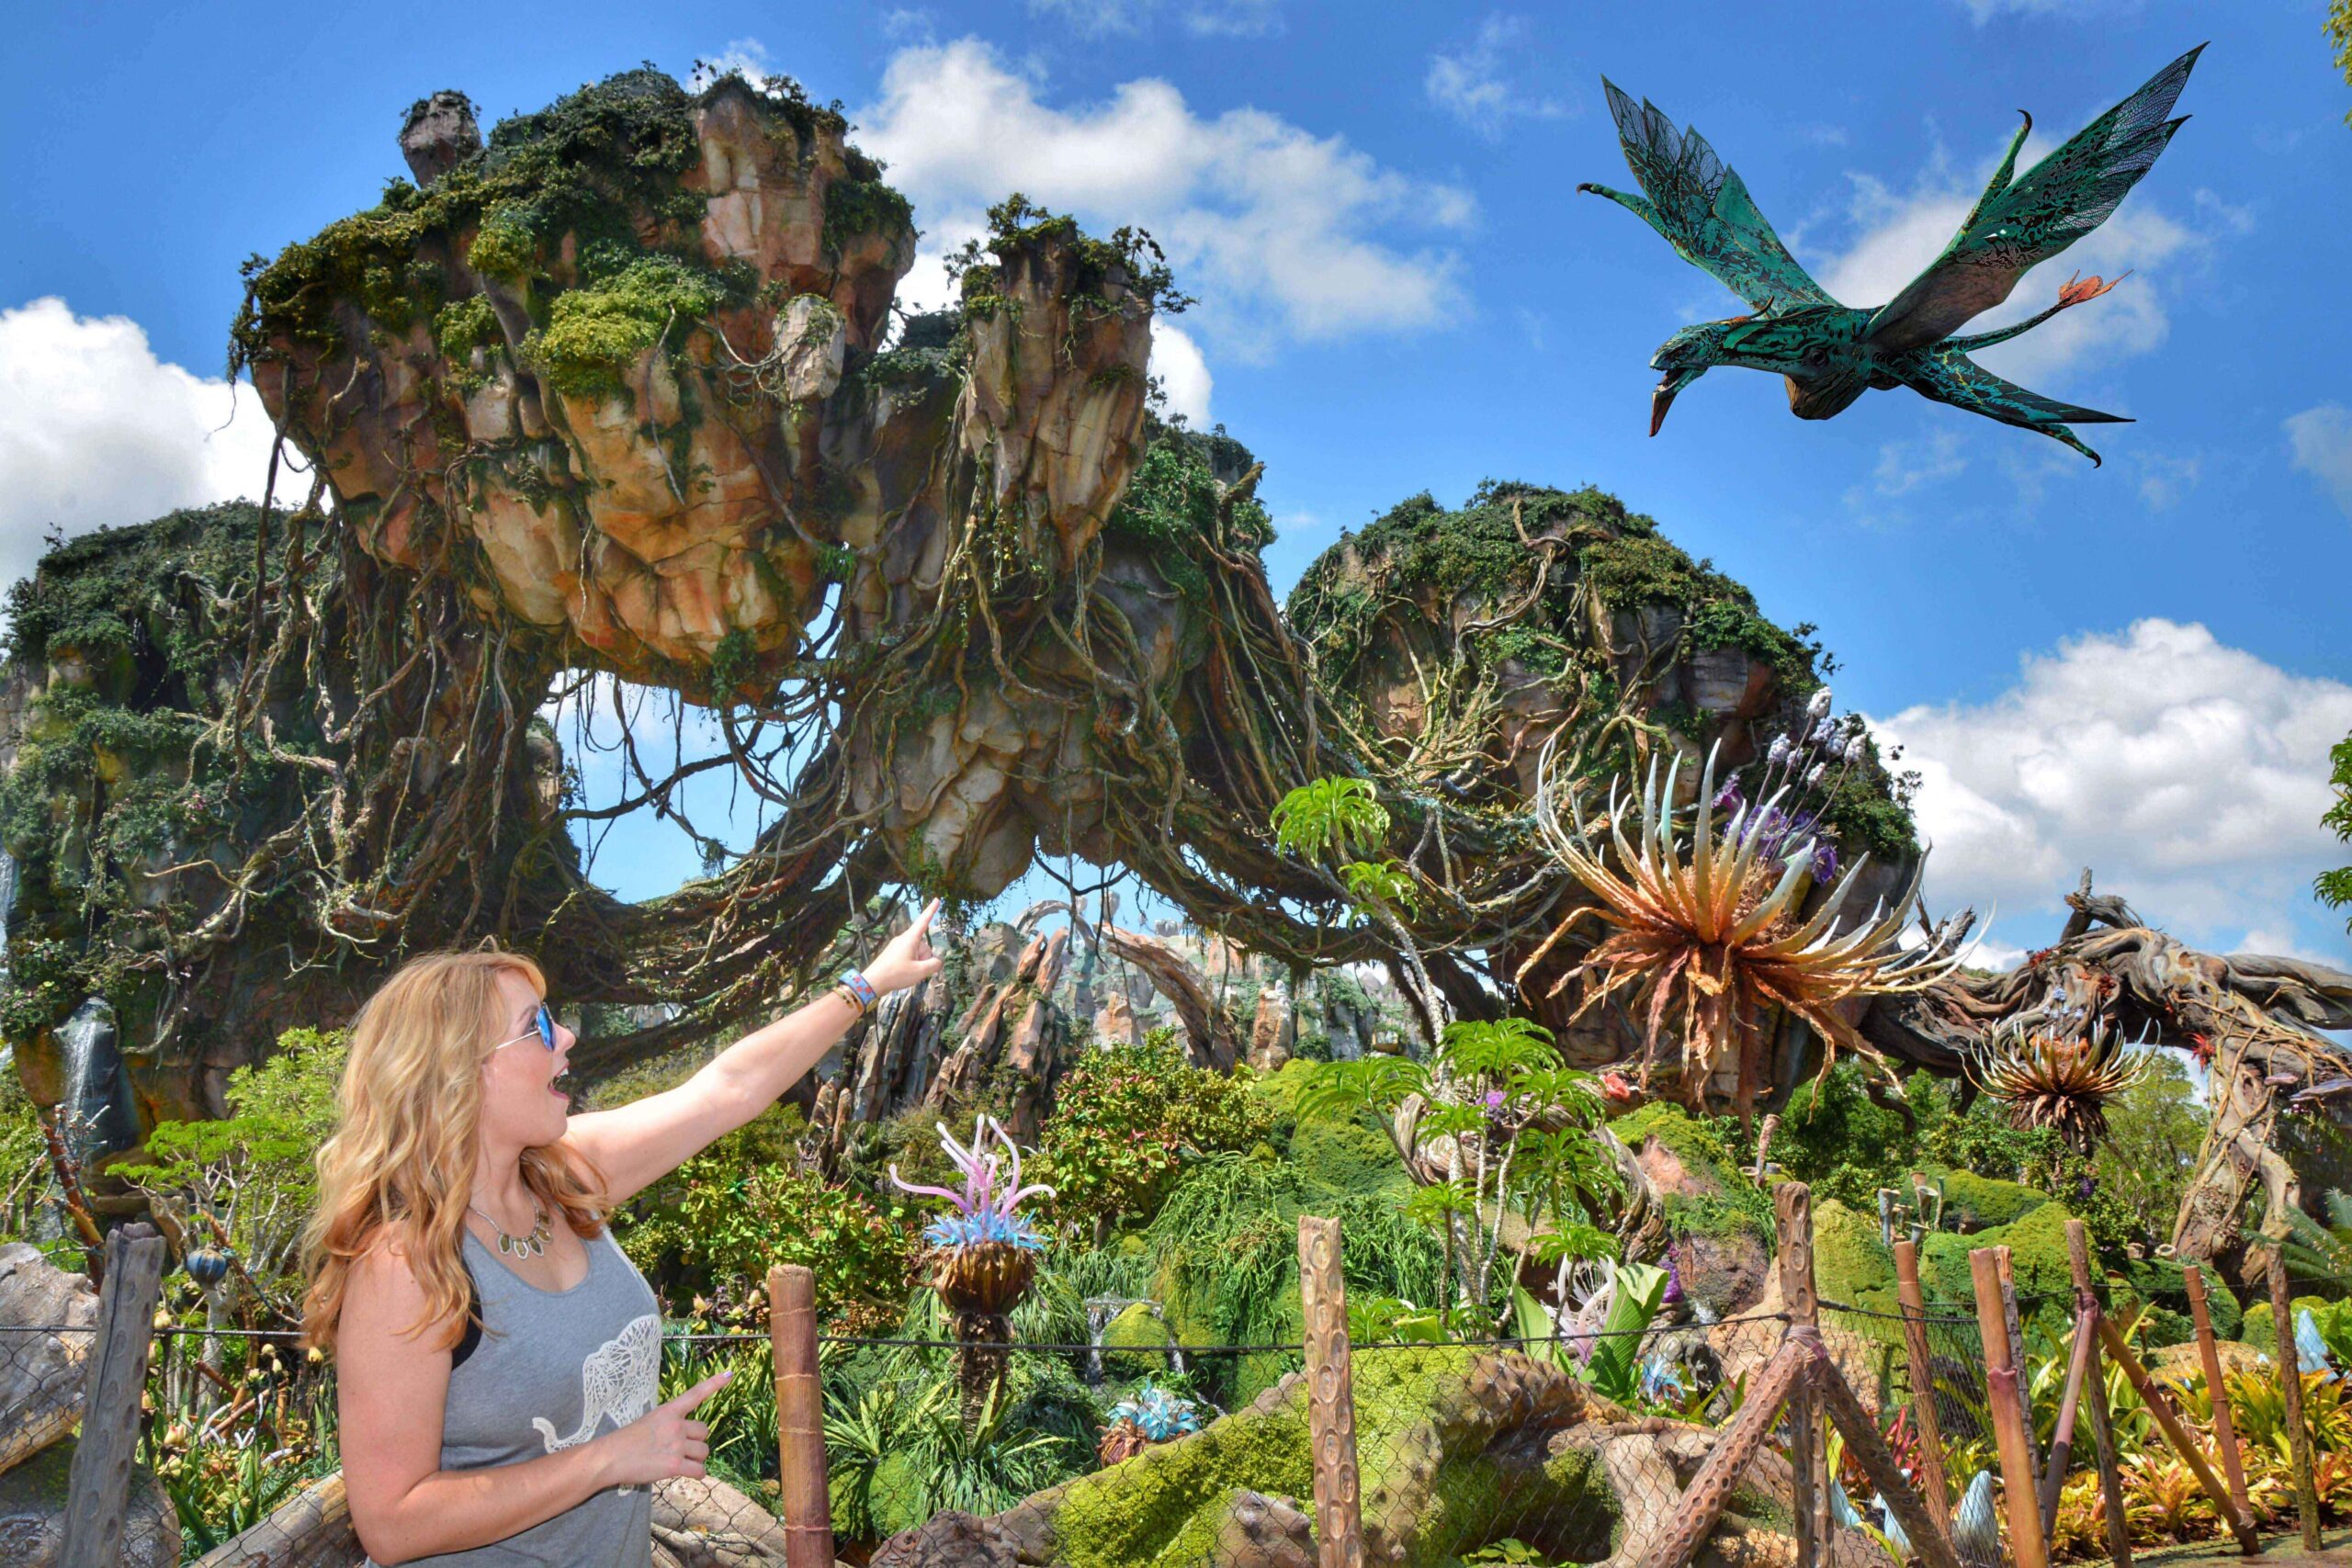 Disneyland Paris Version of Pandora  The World of Avatar Land Seems  Likely Given Disneyland Announcement  WDW News Today